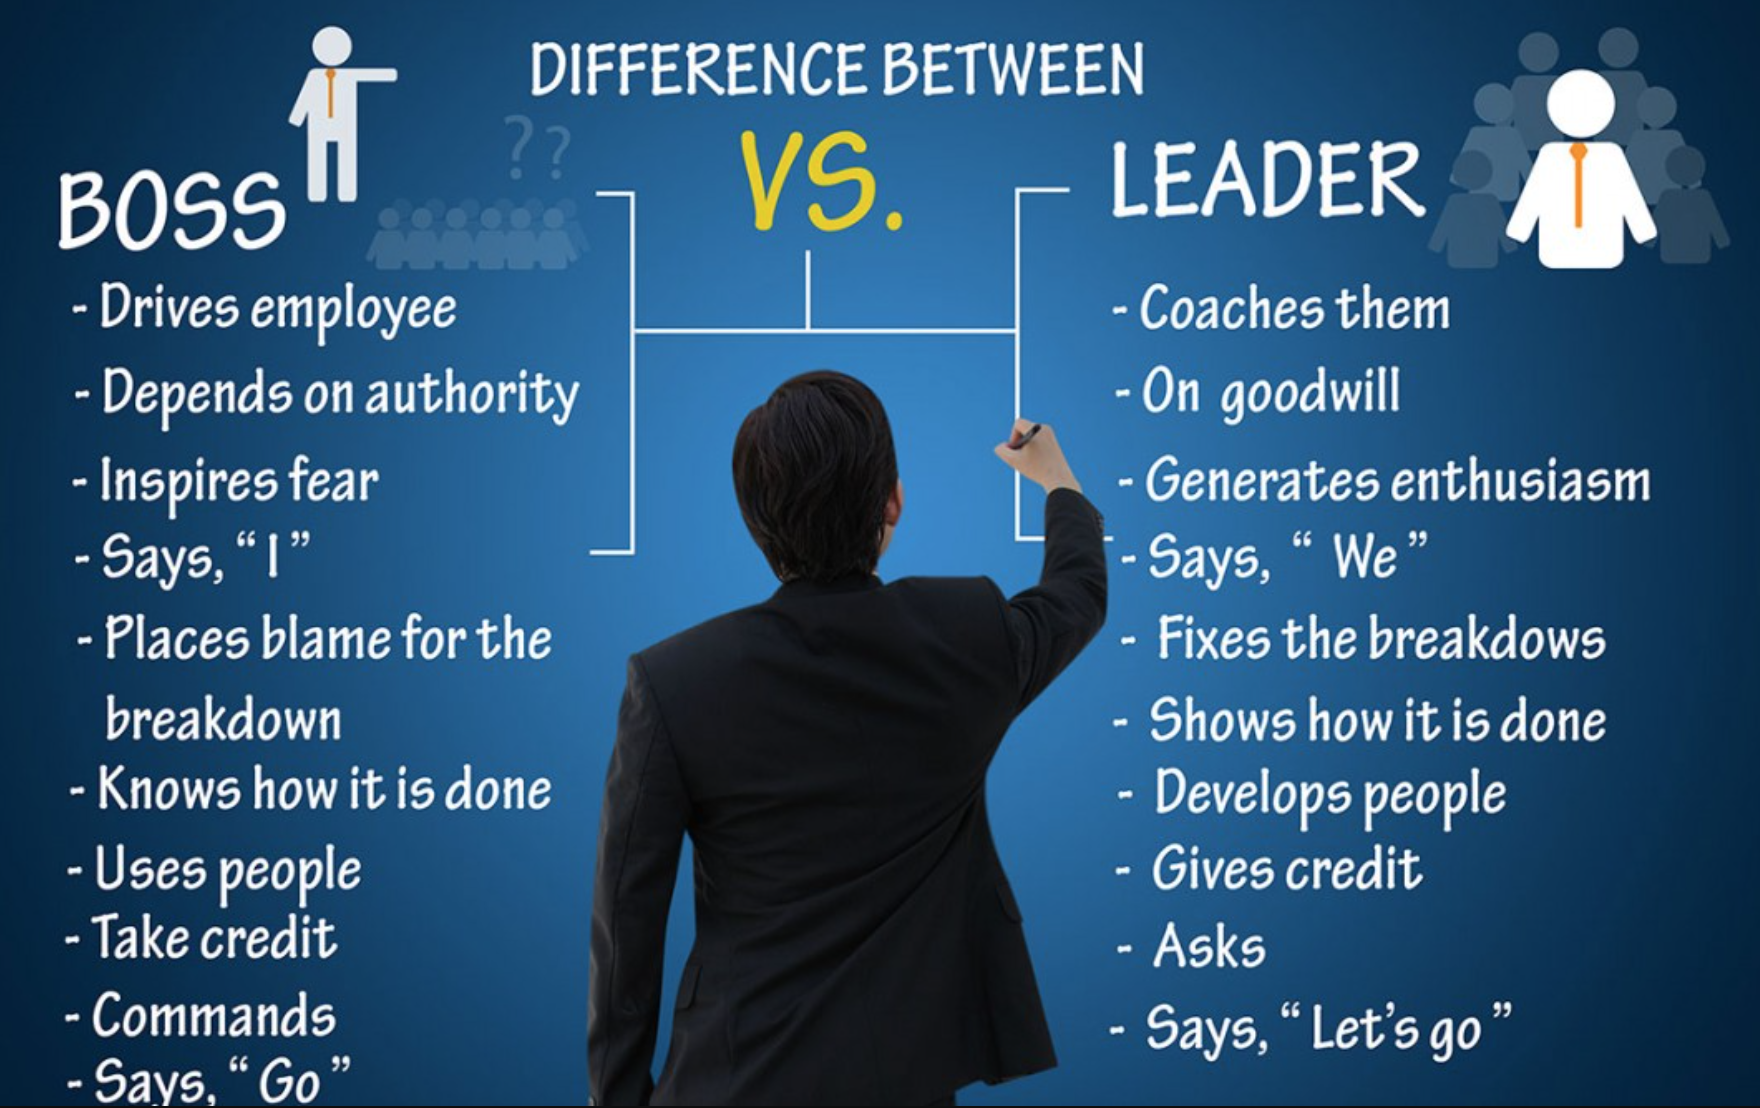 Difference between a boss and a leader.